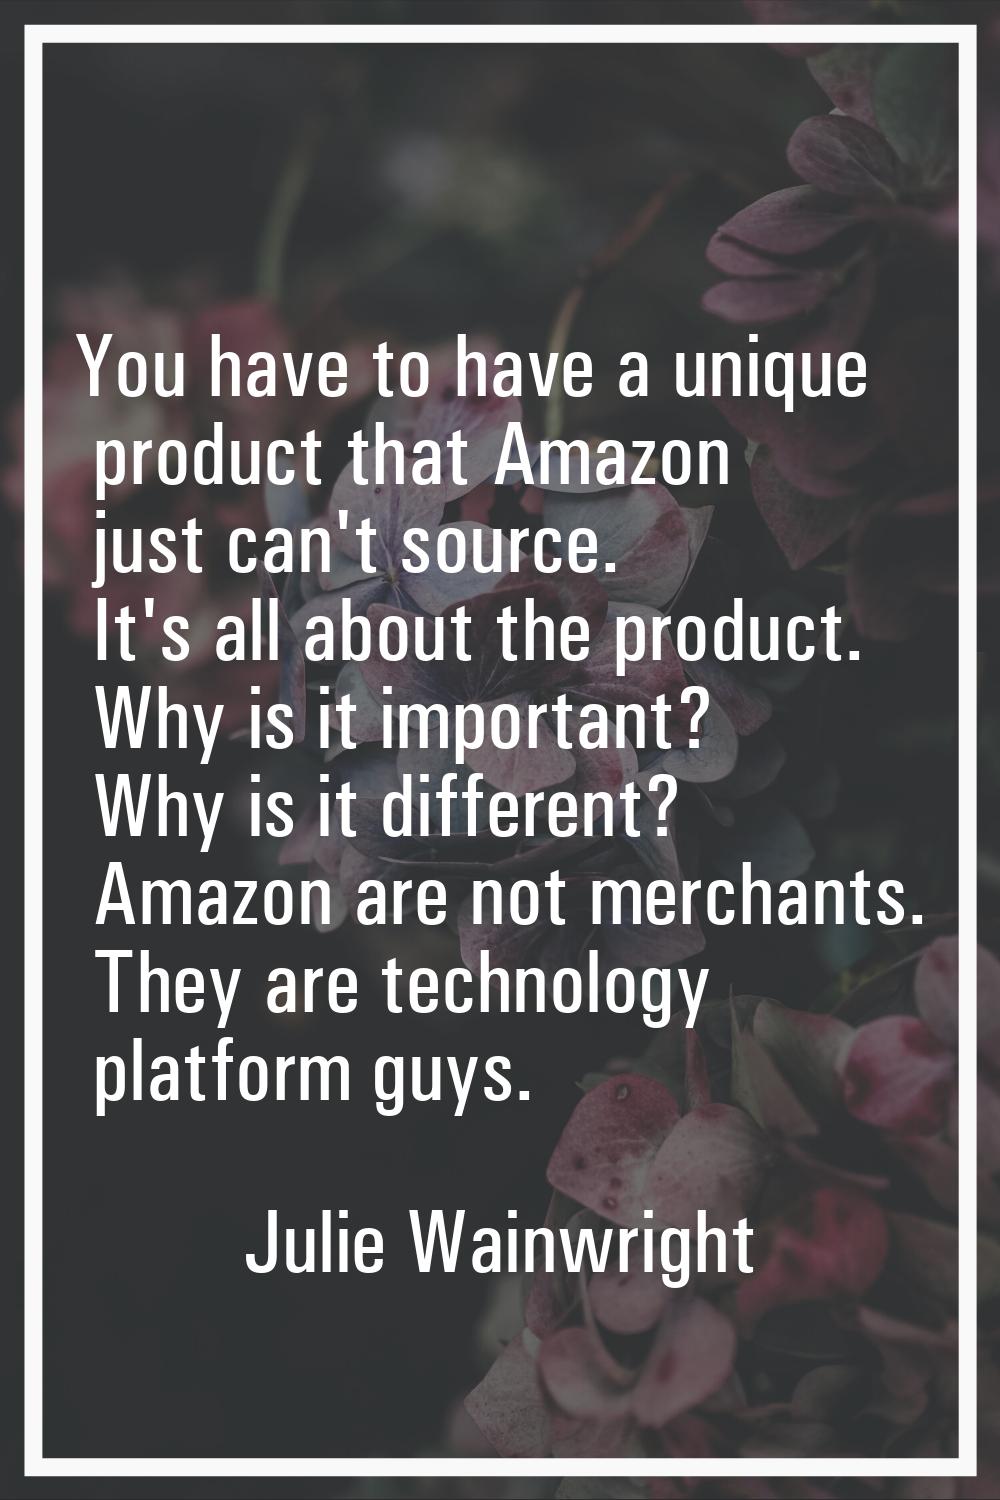 You have to have a unique product that Amazon just can't source. It's all about the product. Why is